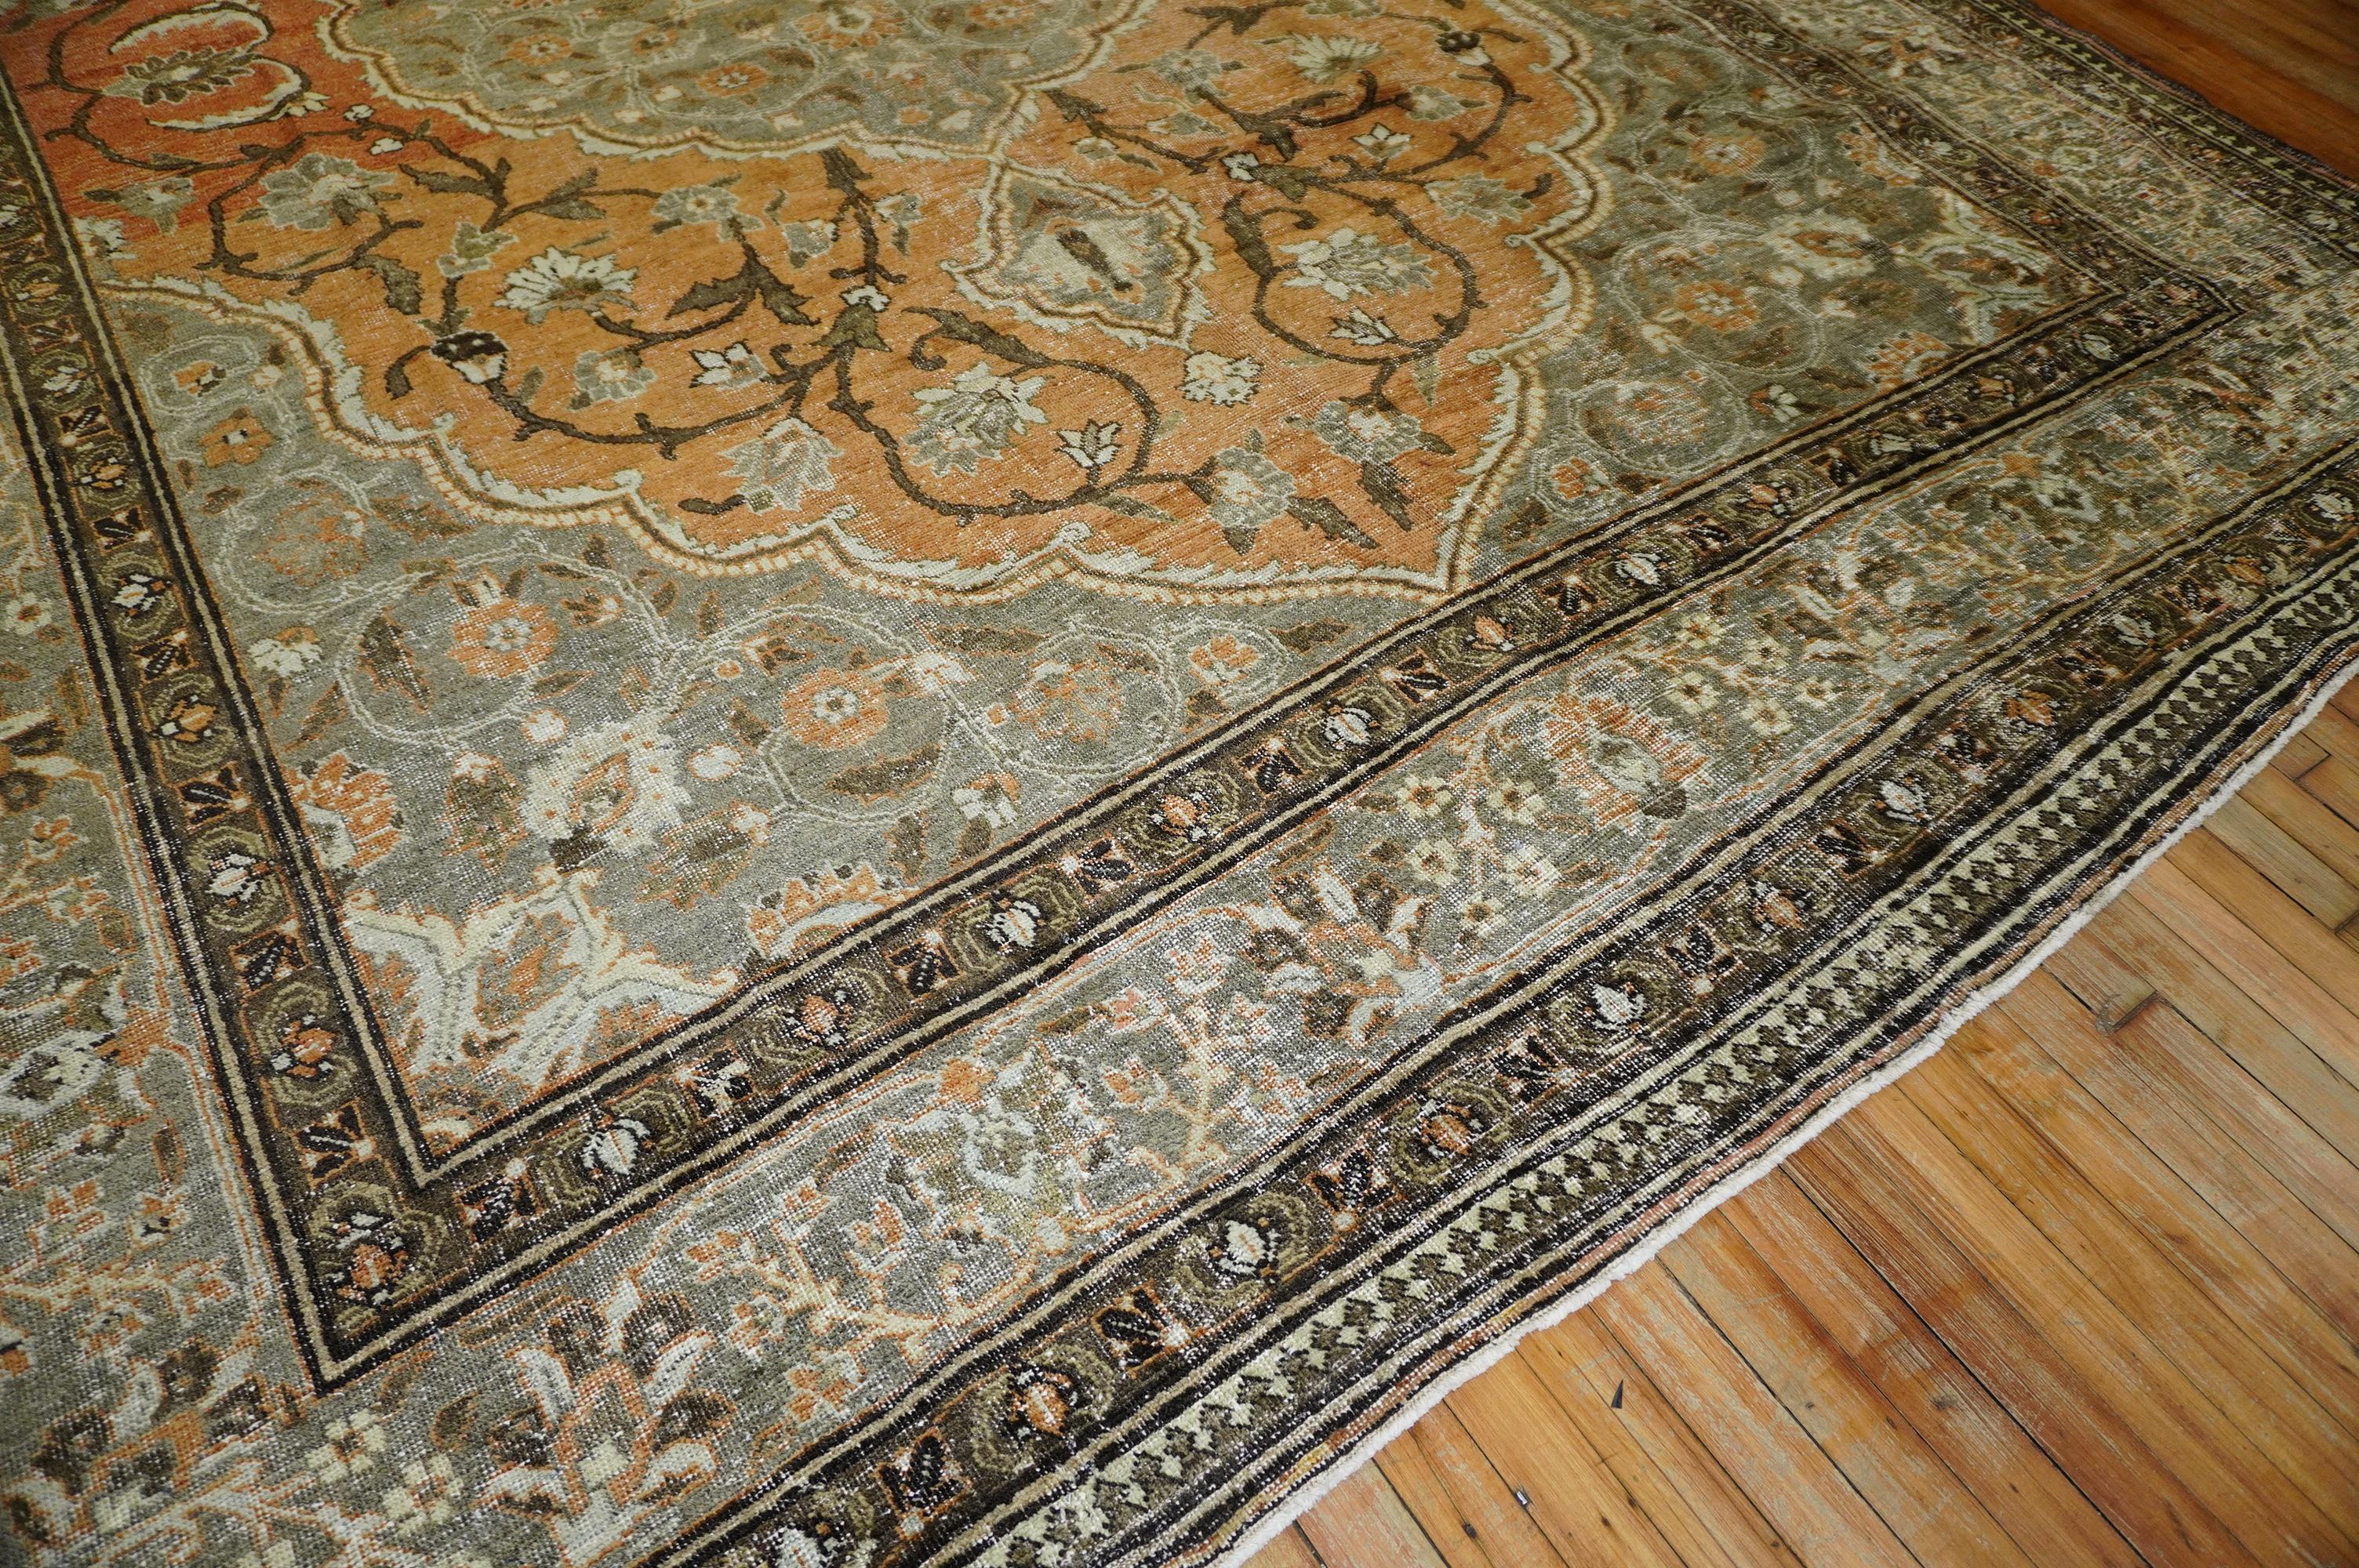 An early 20th century Persian Formal Tabriz rug. Overall even wear throughout in orange and brown.

Measures: 9'6